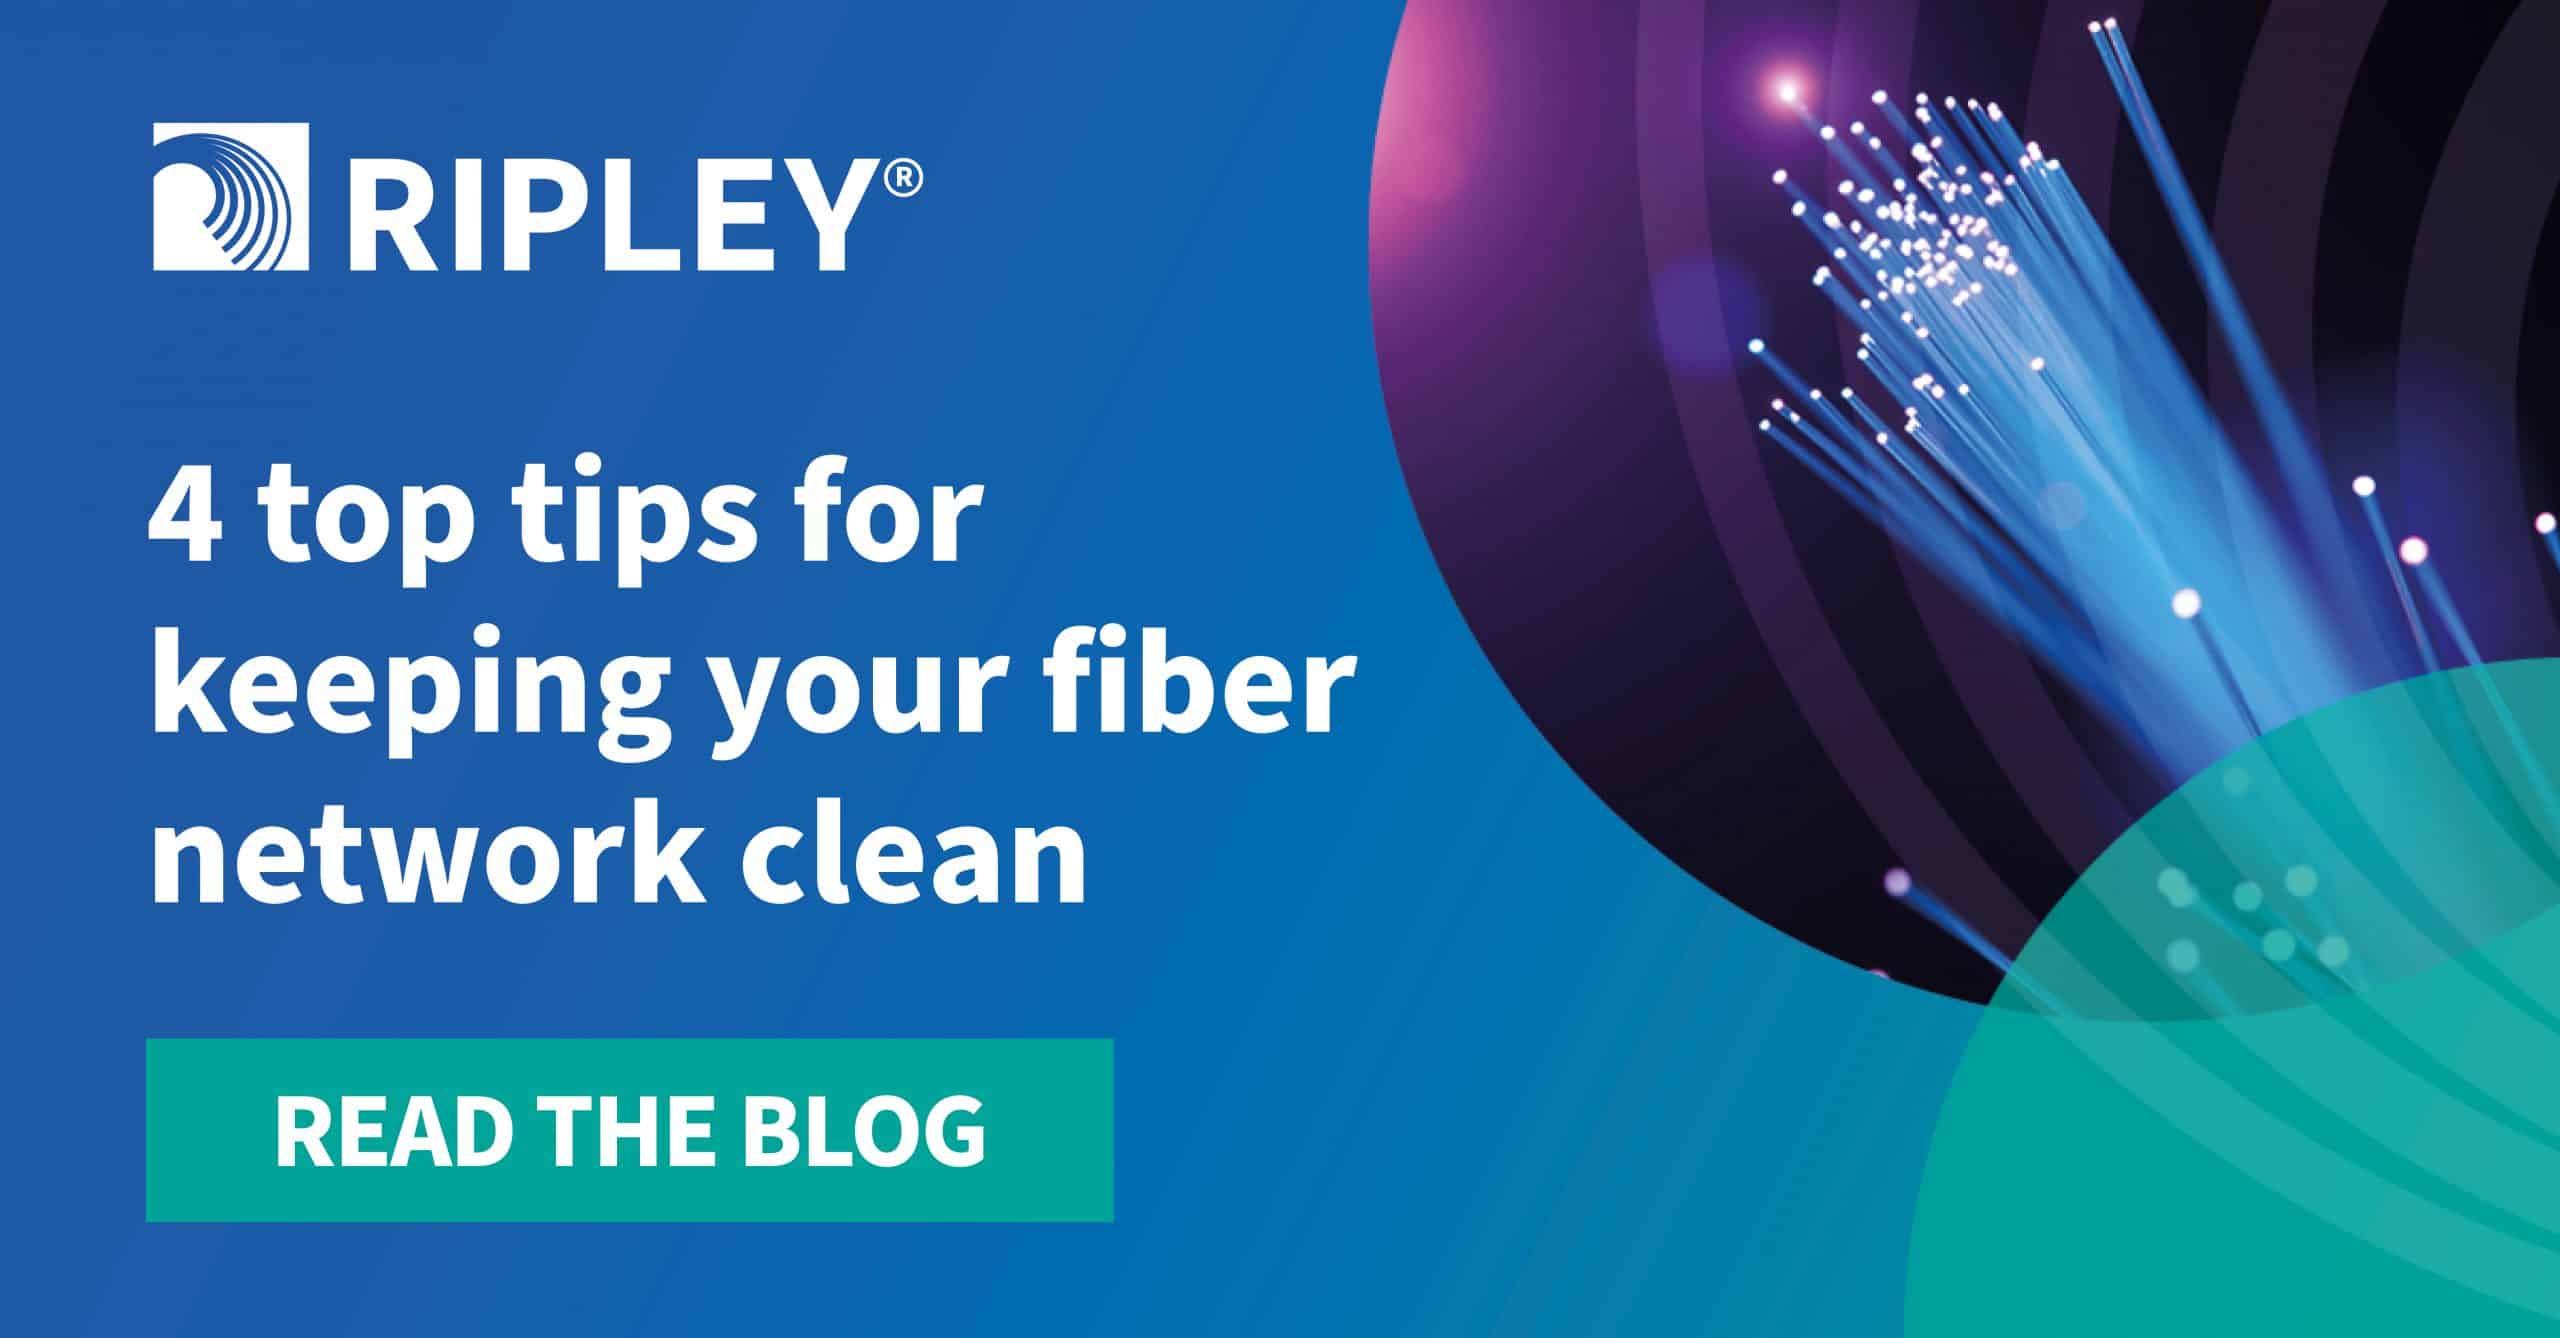 4 top tips for keeping your fiber network clean